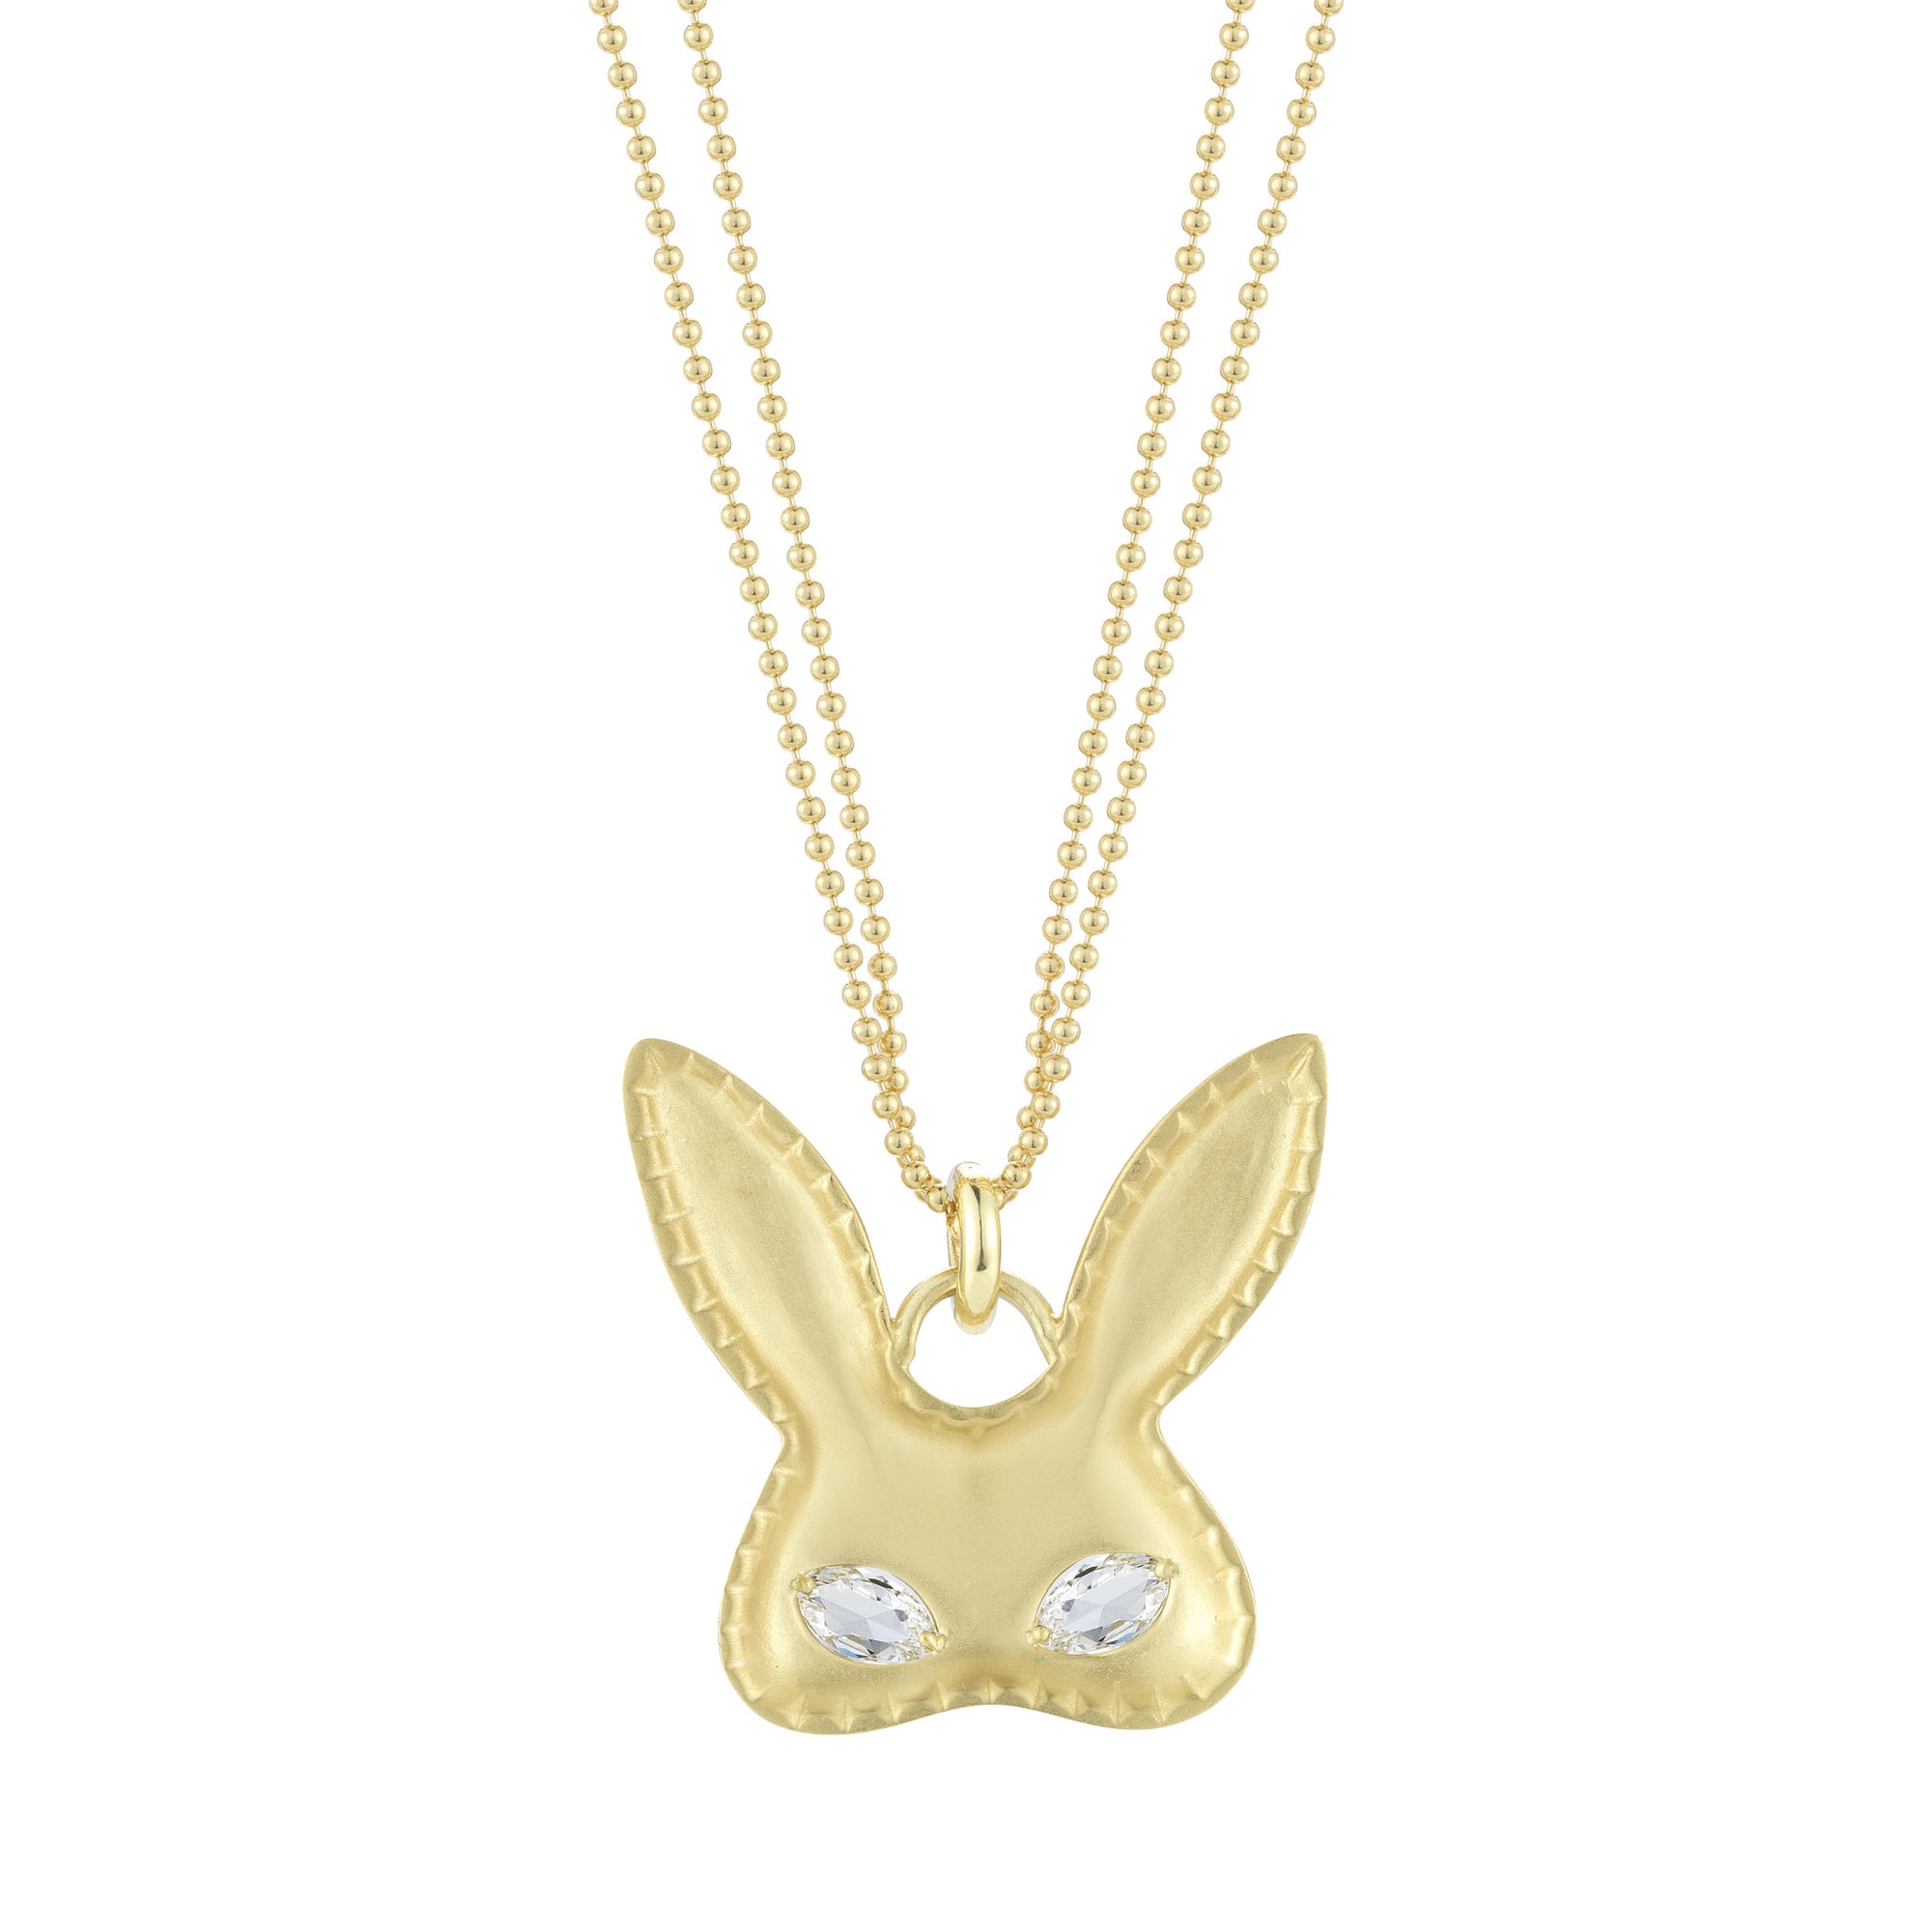 18k gold rabbit bunny costume mask pendant with diamond eyes on wrapped chain by finn by candice pool neistat